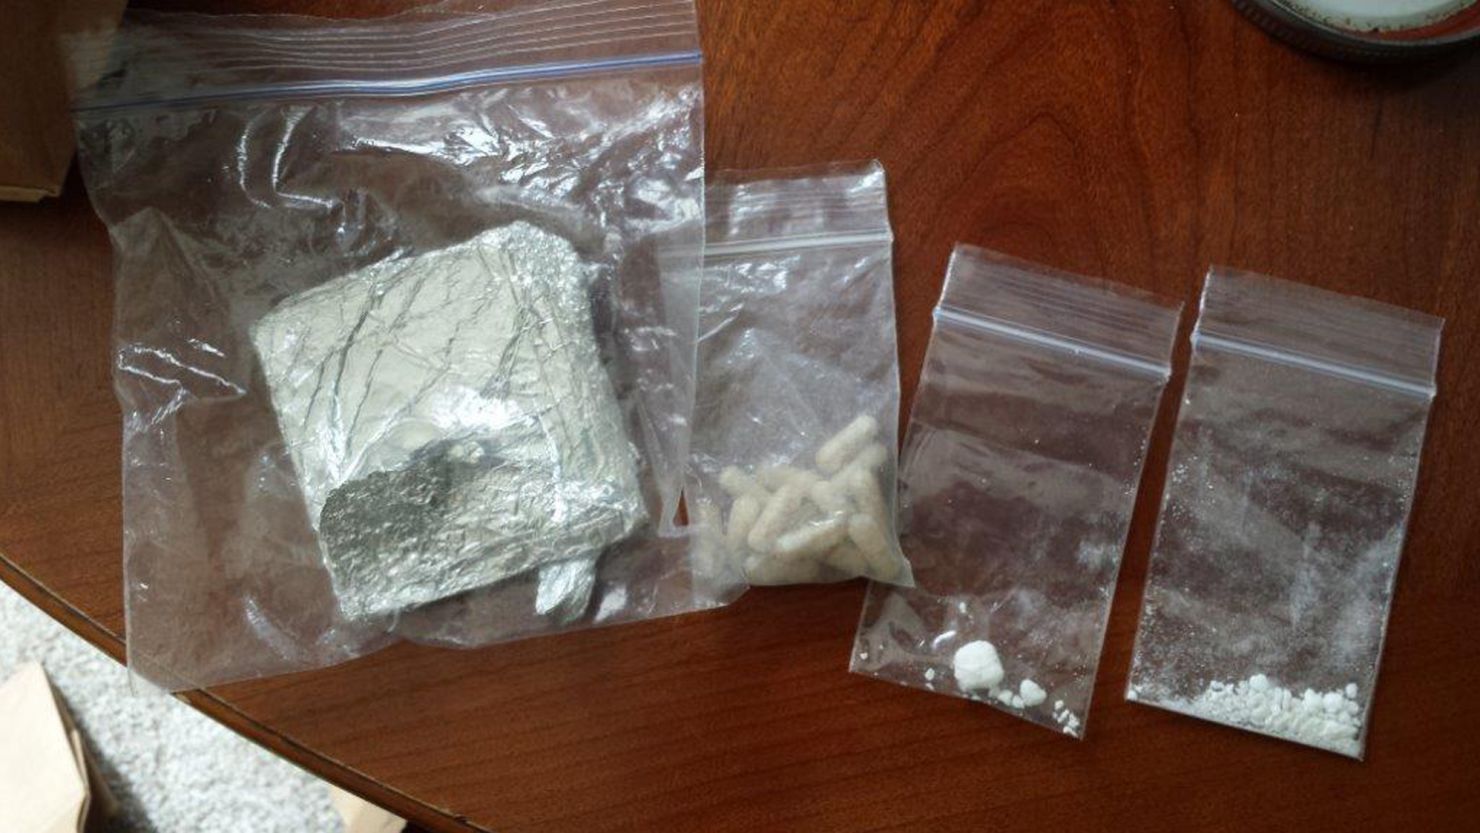 This image provided by the King County Sheriff's Office shows some of the drugs seized in the operation.